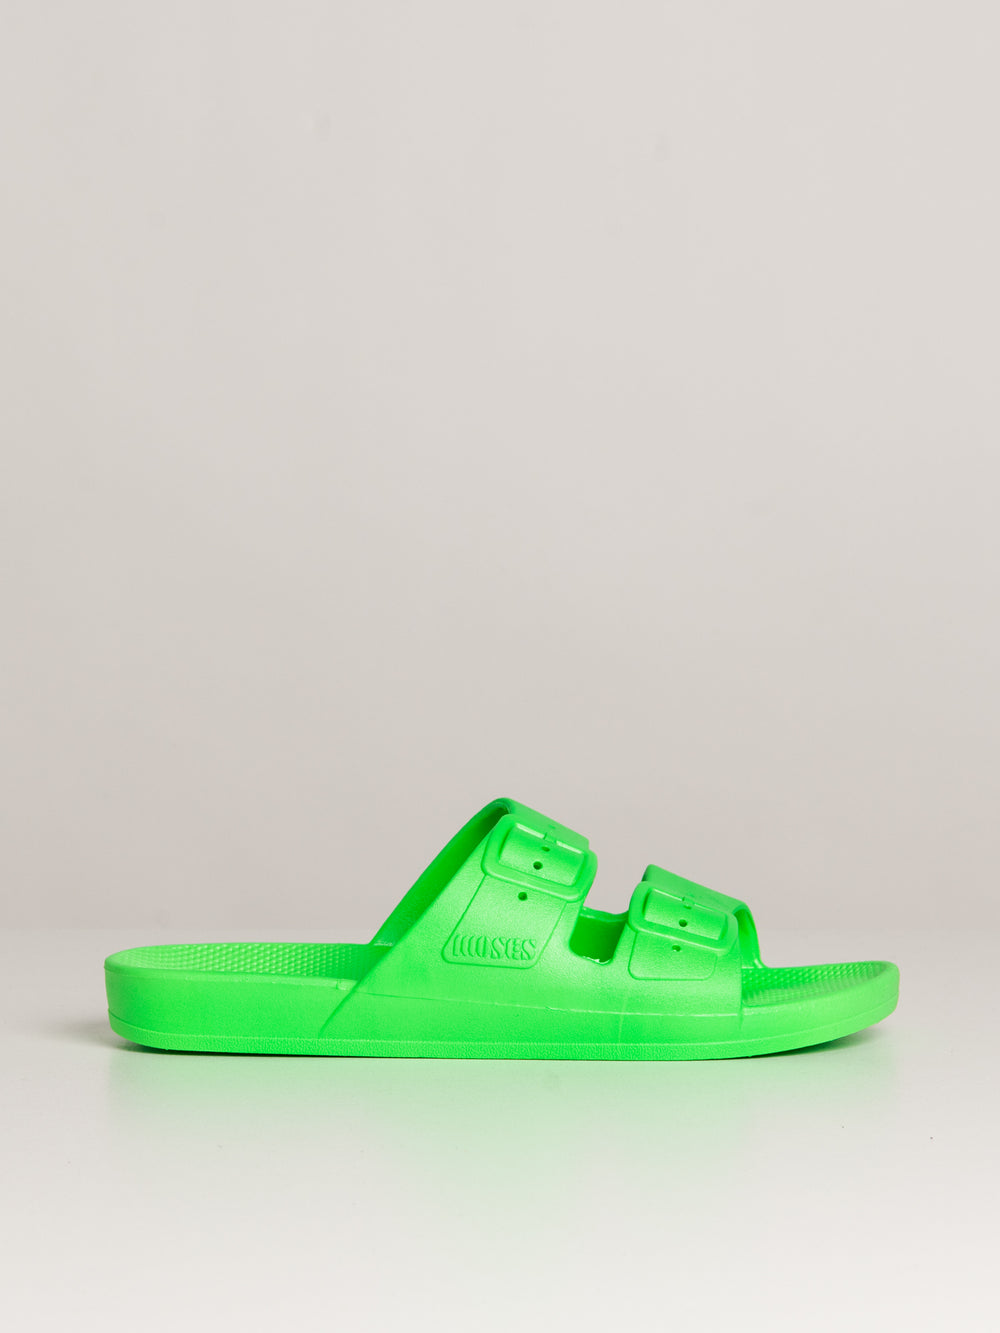 WOMENS FREEDOM MOSES FREEDOM MOLLY LIME SANDAL - CLEARANCE